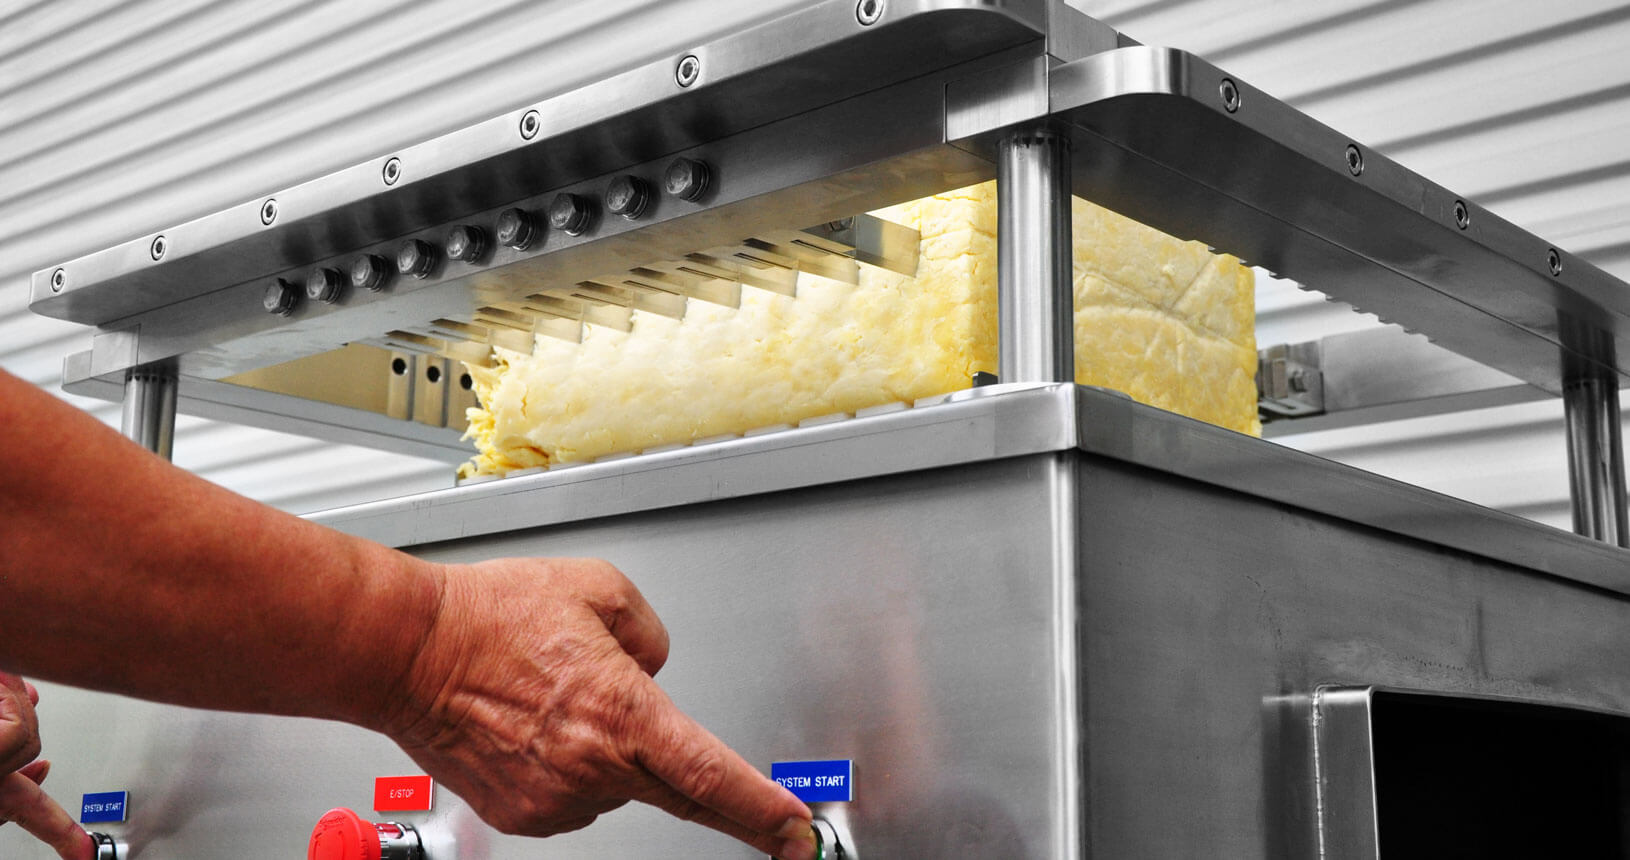 A cutting machine to divide a single processed cheese block into smaller cubes or blocks.